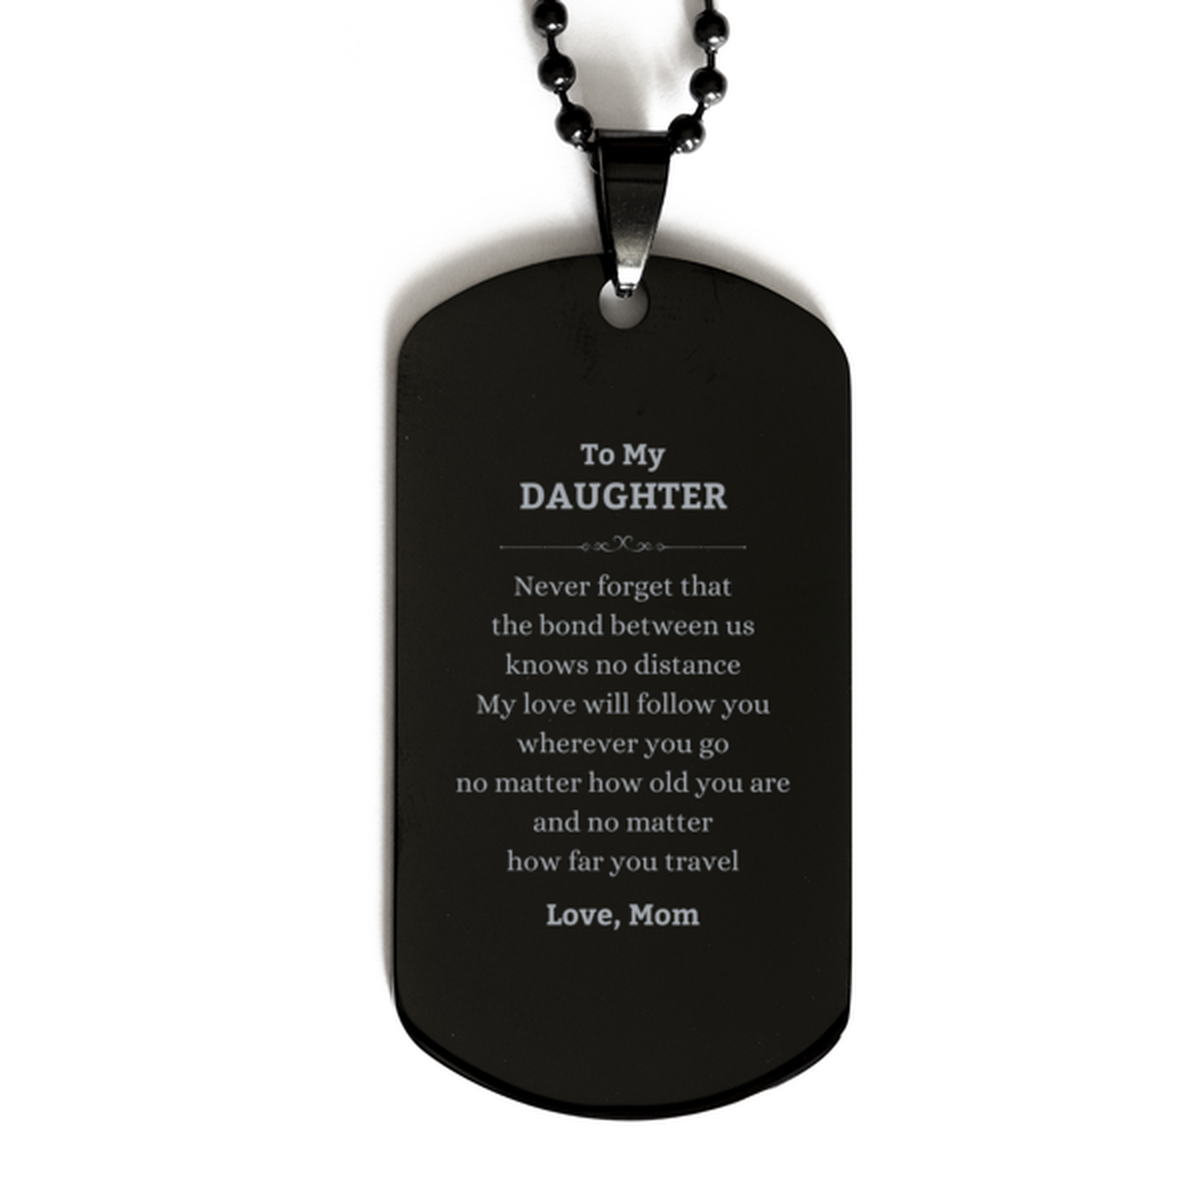 Daughter Birthday Gifts from Mom, Adjustable Black Dog Tag for Daughter Christmas Graduation Unique Gifts Daughter Never forget that the bond between us knows no distance. Love, Mom